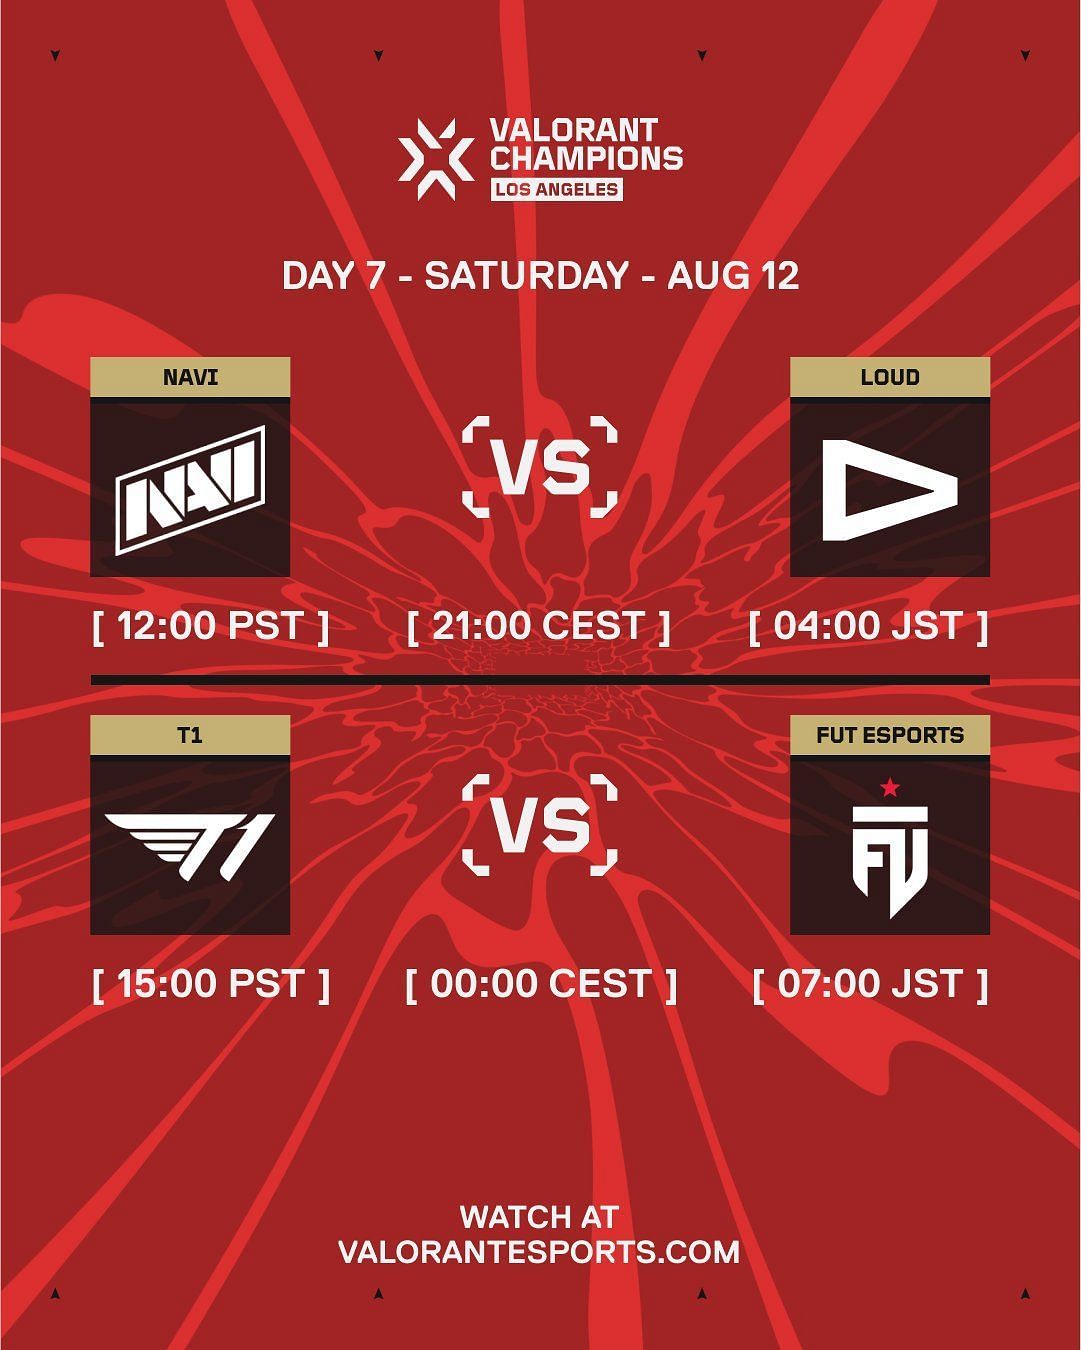 Day 7 schedule (Image via Riot Games)